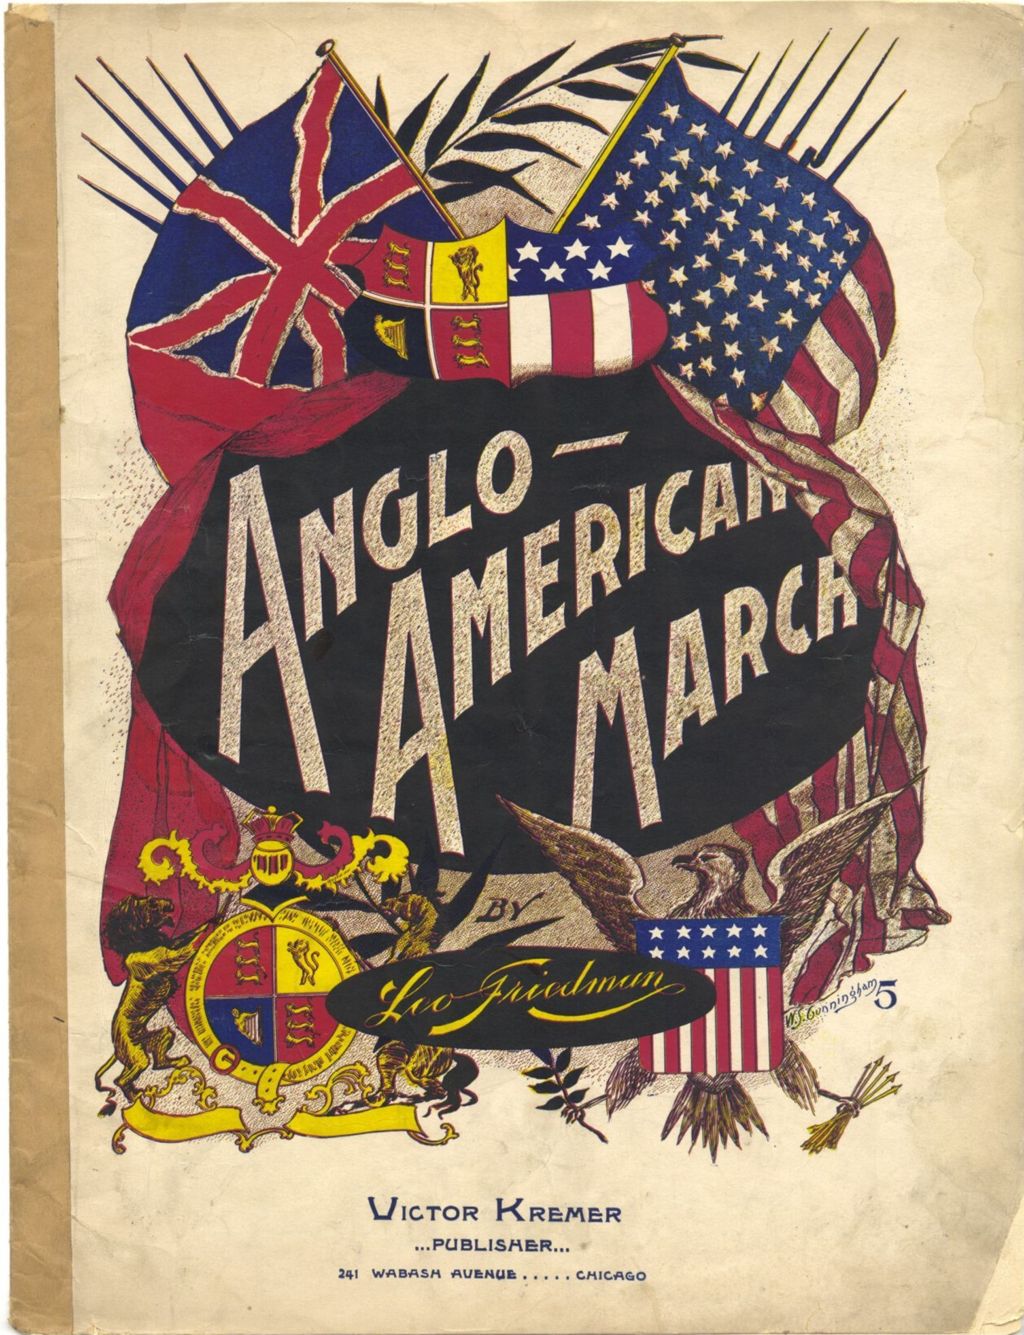 Miniature of Anglo-American (March and Two Step)